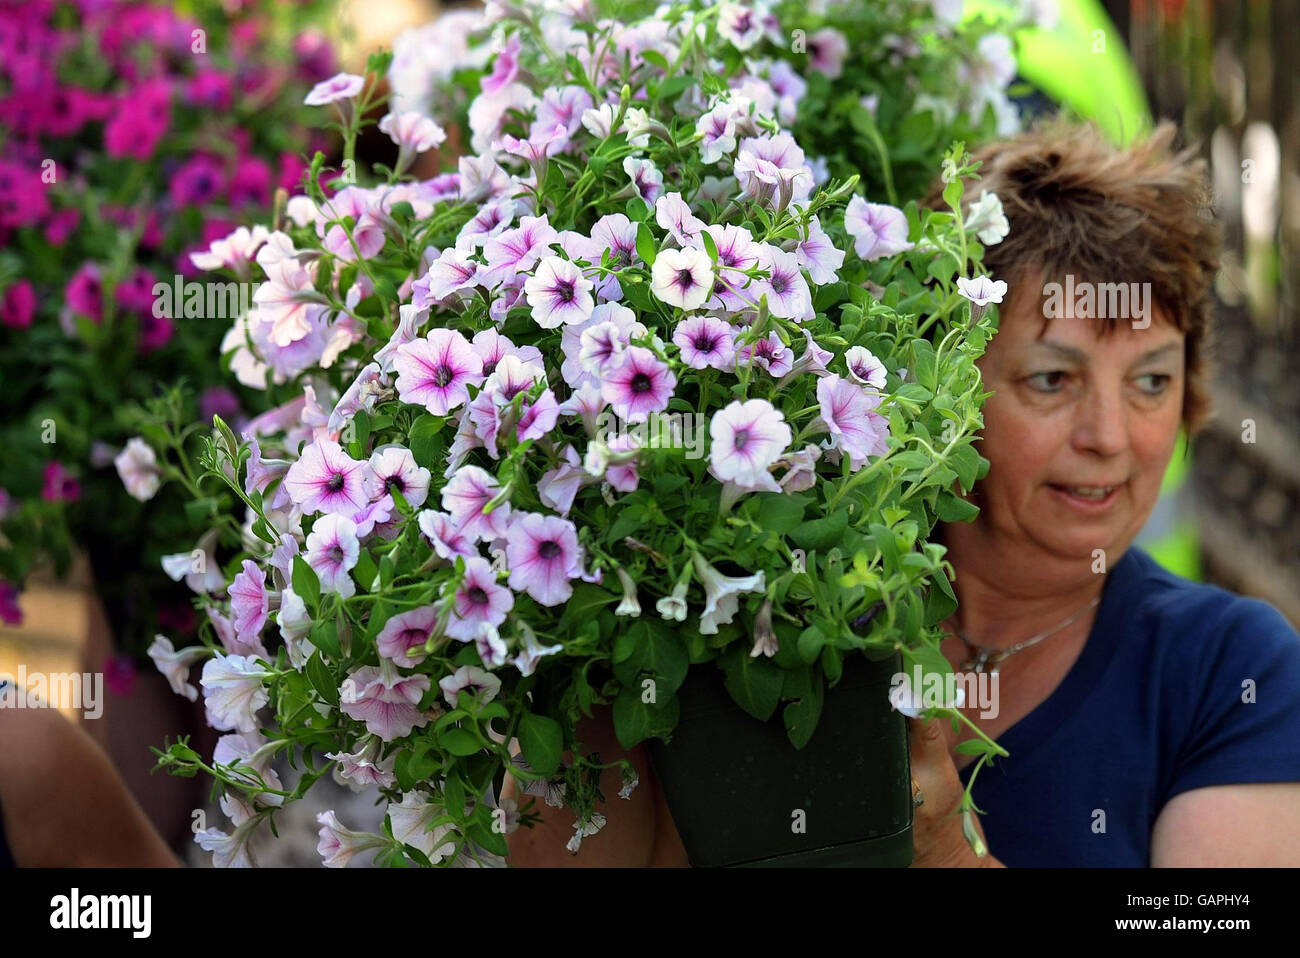 The last day of the annual Chelsea flower show in London, and bargain hunters carry off some of the exhibits for knock-down prices. Stock Photo